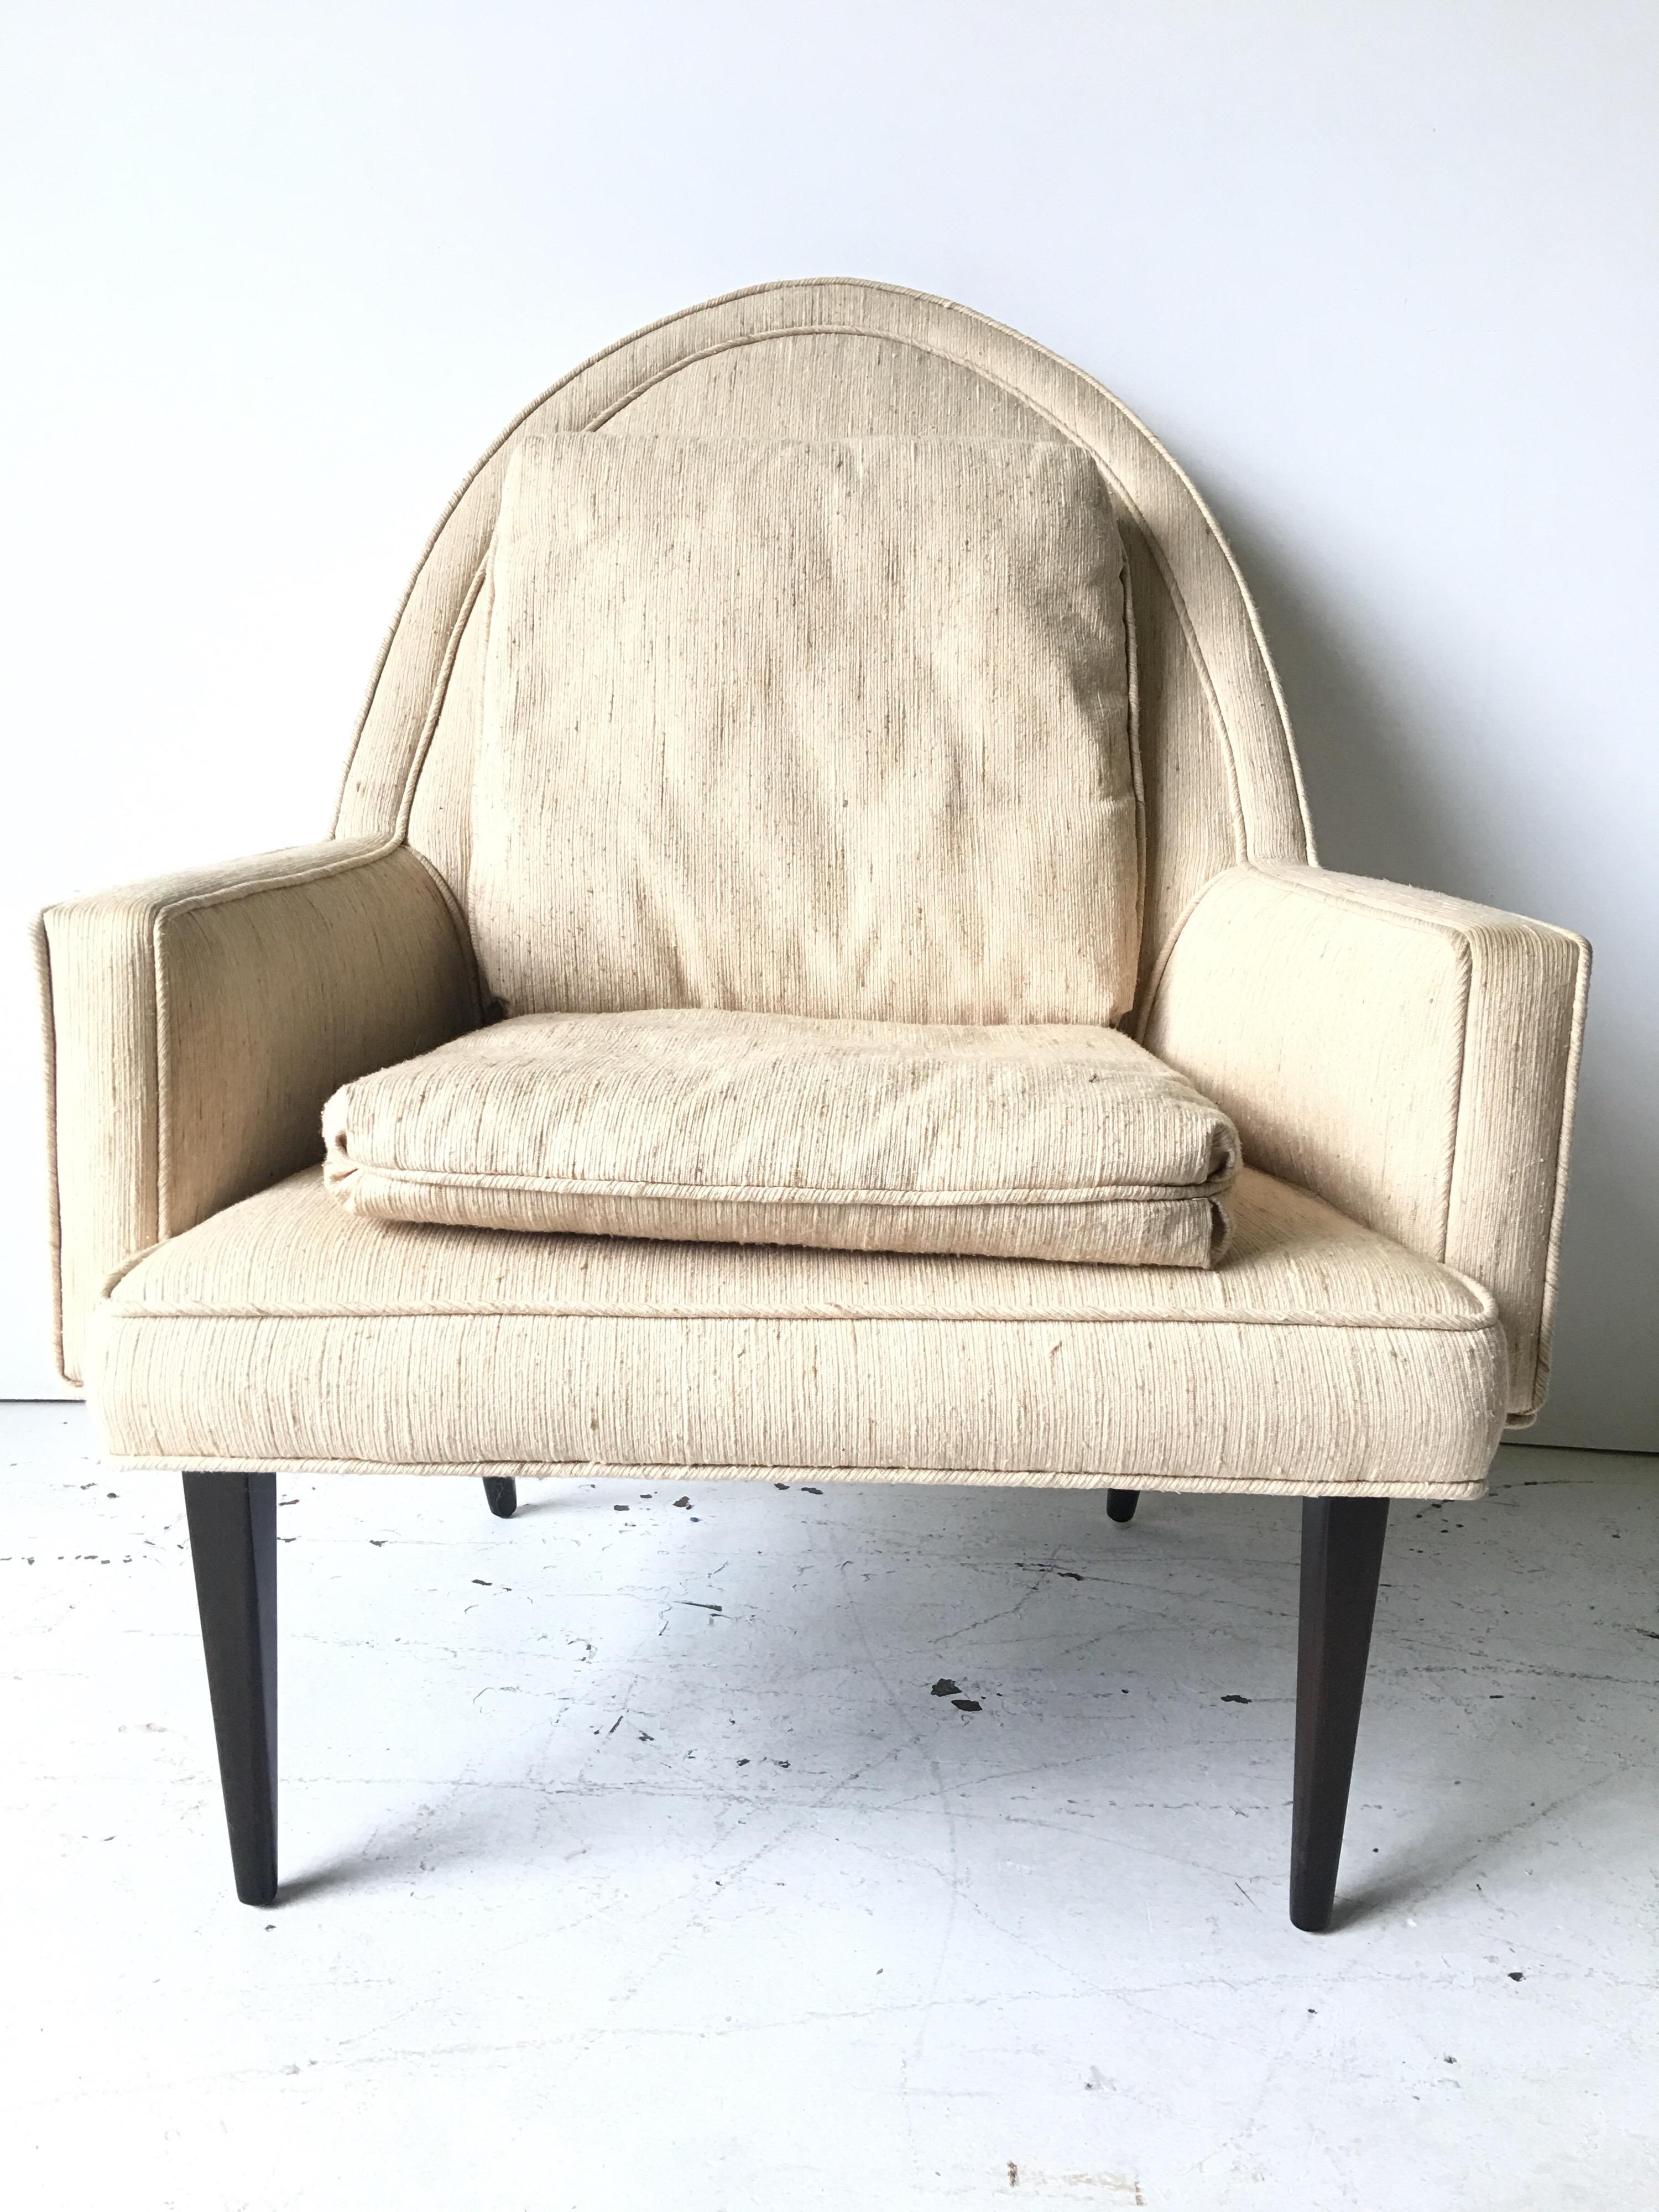 What a fantastic design, high back, with overlapping seat, from the bracket base. The tall teardrop back and arms are sleek and narrow. It is in its original clean state, but will need reupholster to be perfect. Great design, very seldom seen!